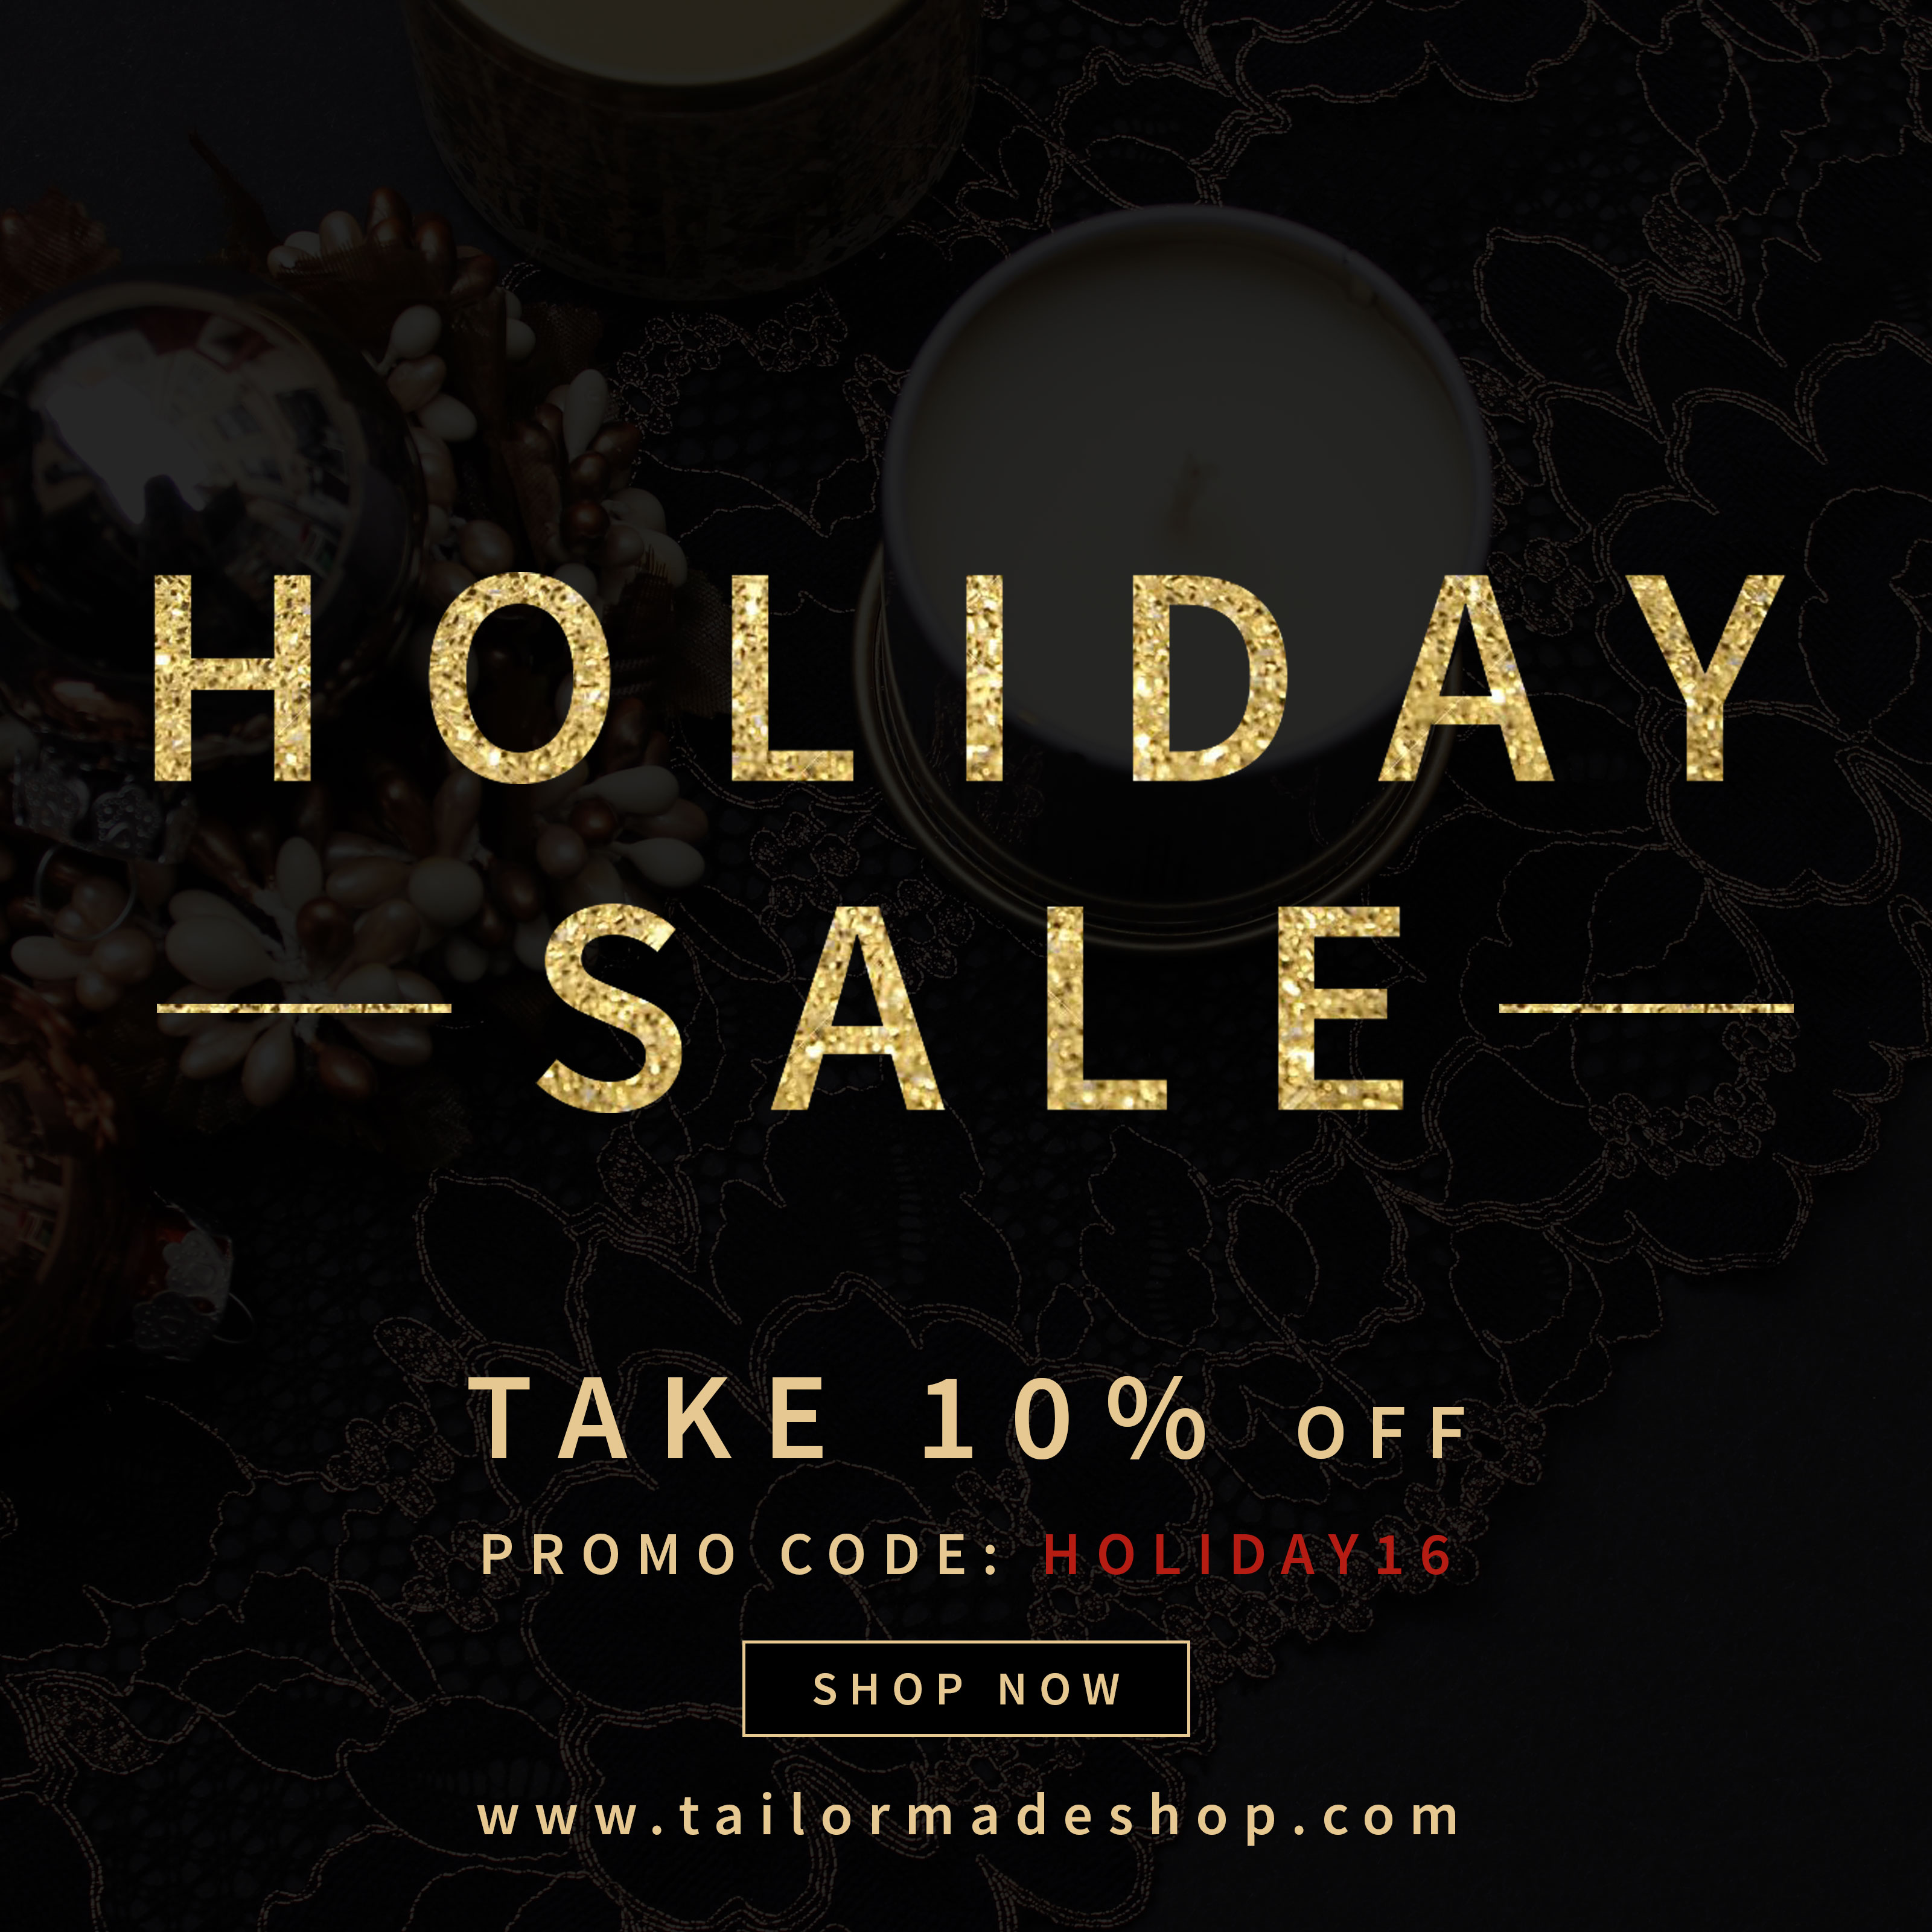 Tailor Made Shop Holiday Sale Promo